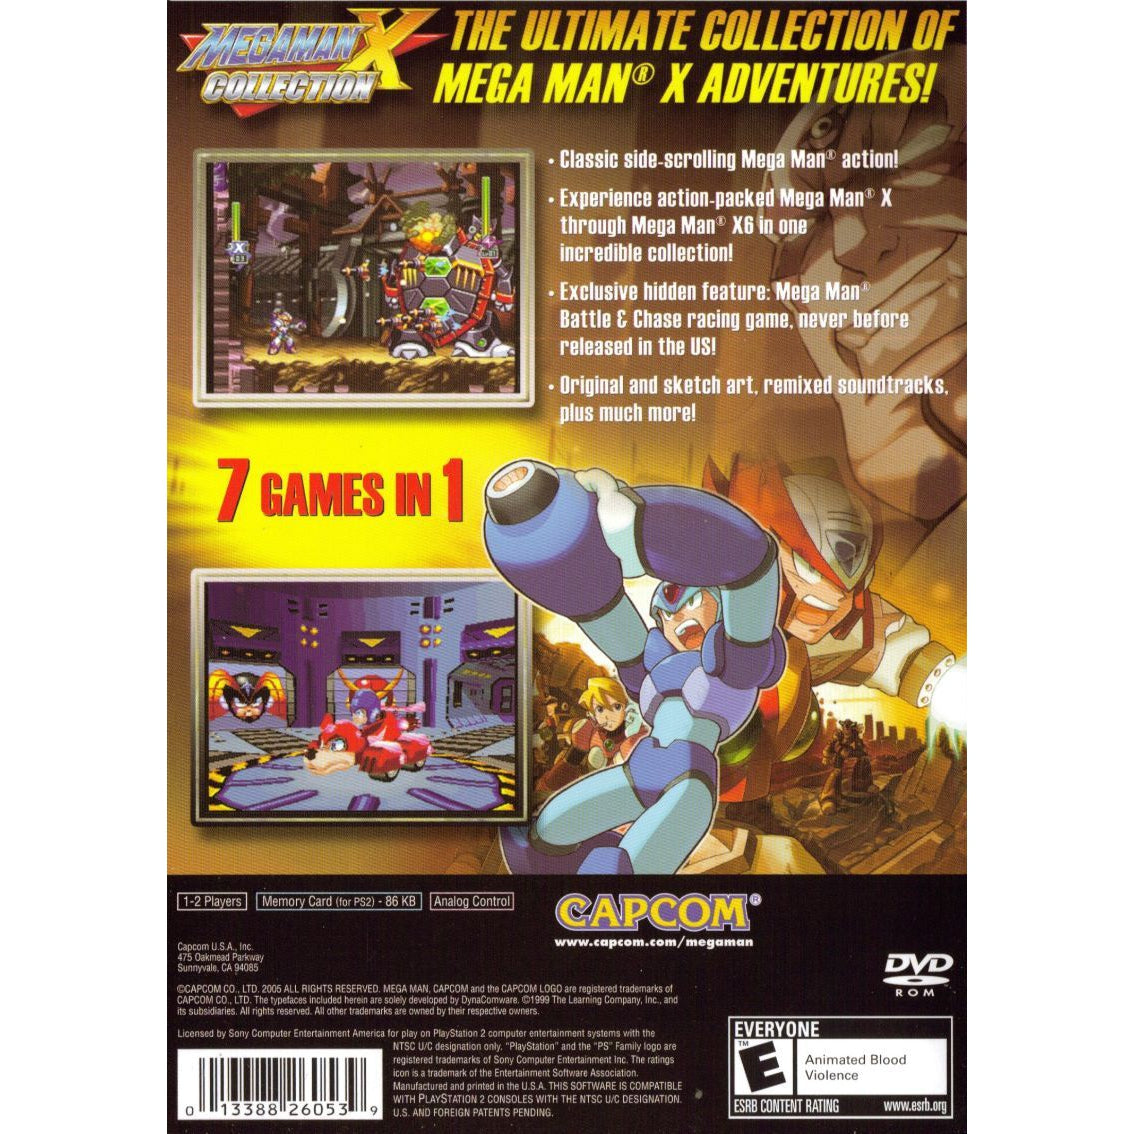 Mega Man X Collection - PlayStation 2 (PS2) Game Complete - YourGamingShop.com - Buy, Sell, Trade Video Games Online. 120 Day Warranty. Satisfaction Guaranteed.